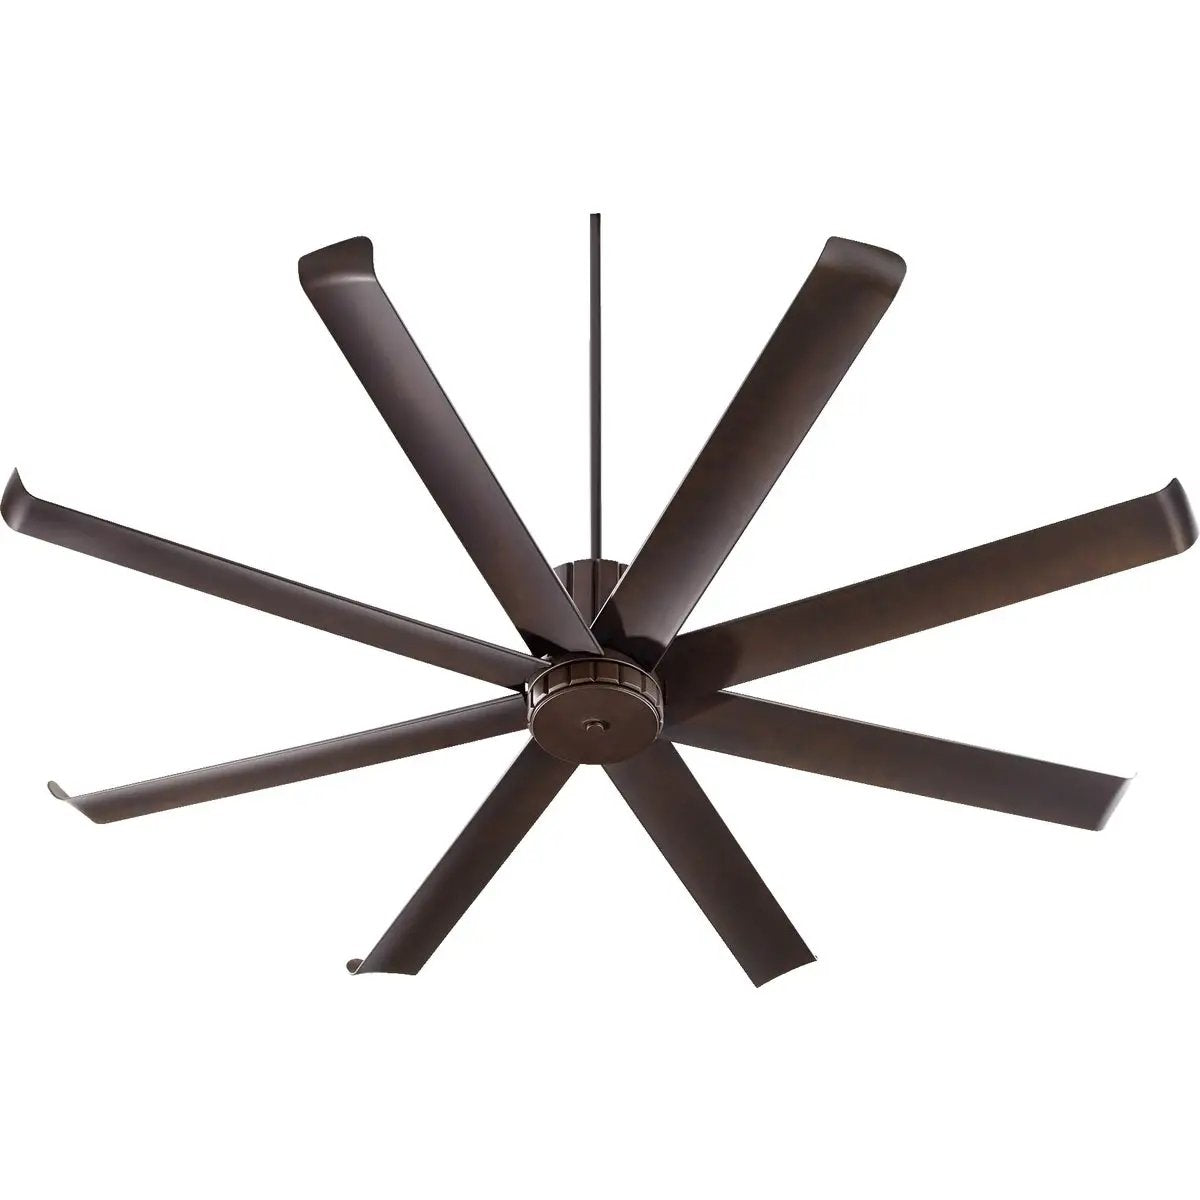 A 72 inch ceiling fan with six blades, positioned for maximum air circulation. The sleek design adds contemporary artistry to its beauty.